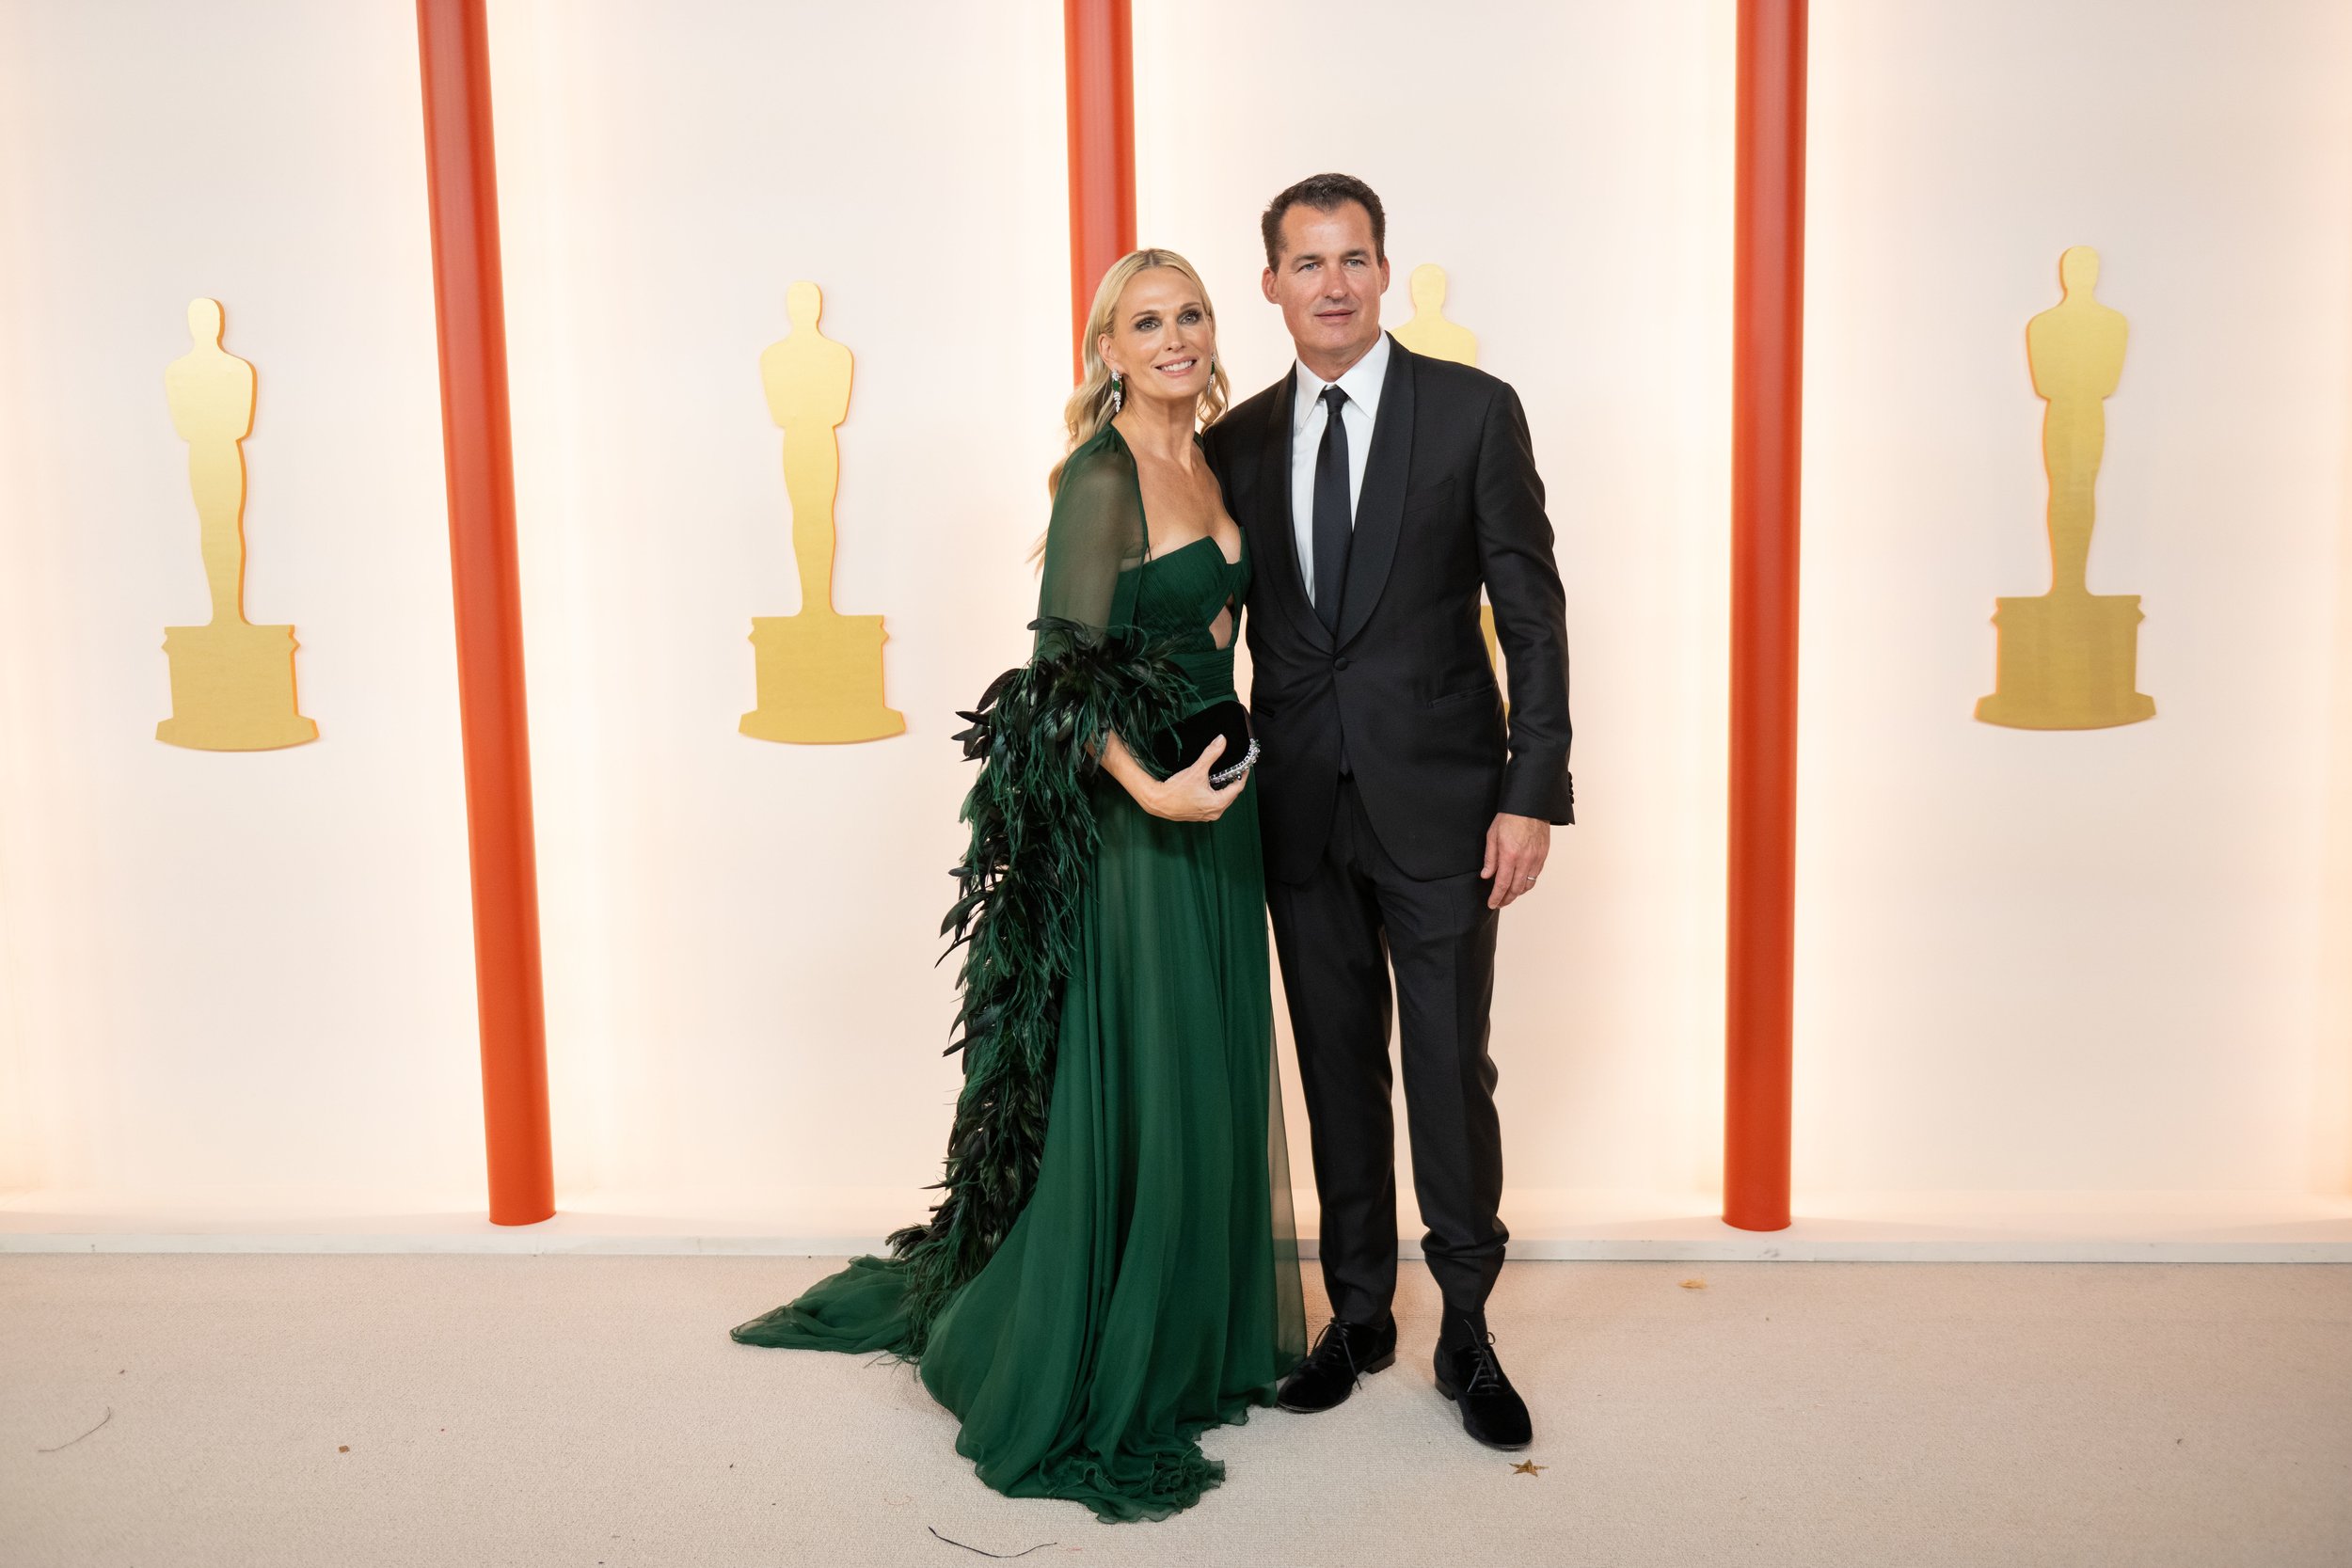 Molly Sims and guest arrive on the red carpet of the 95th Oscars